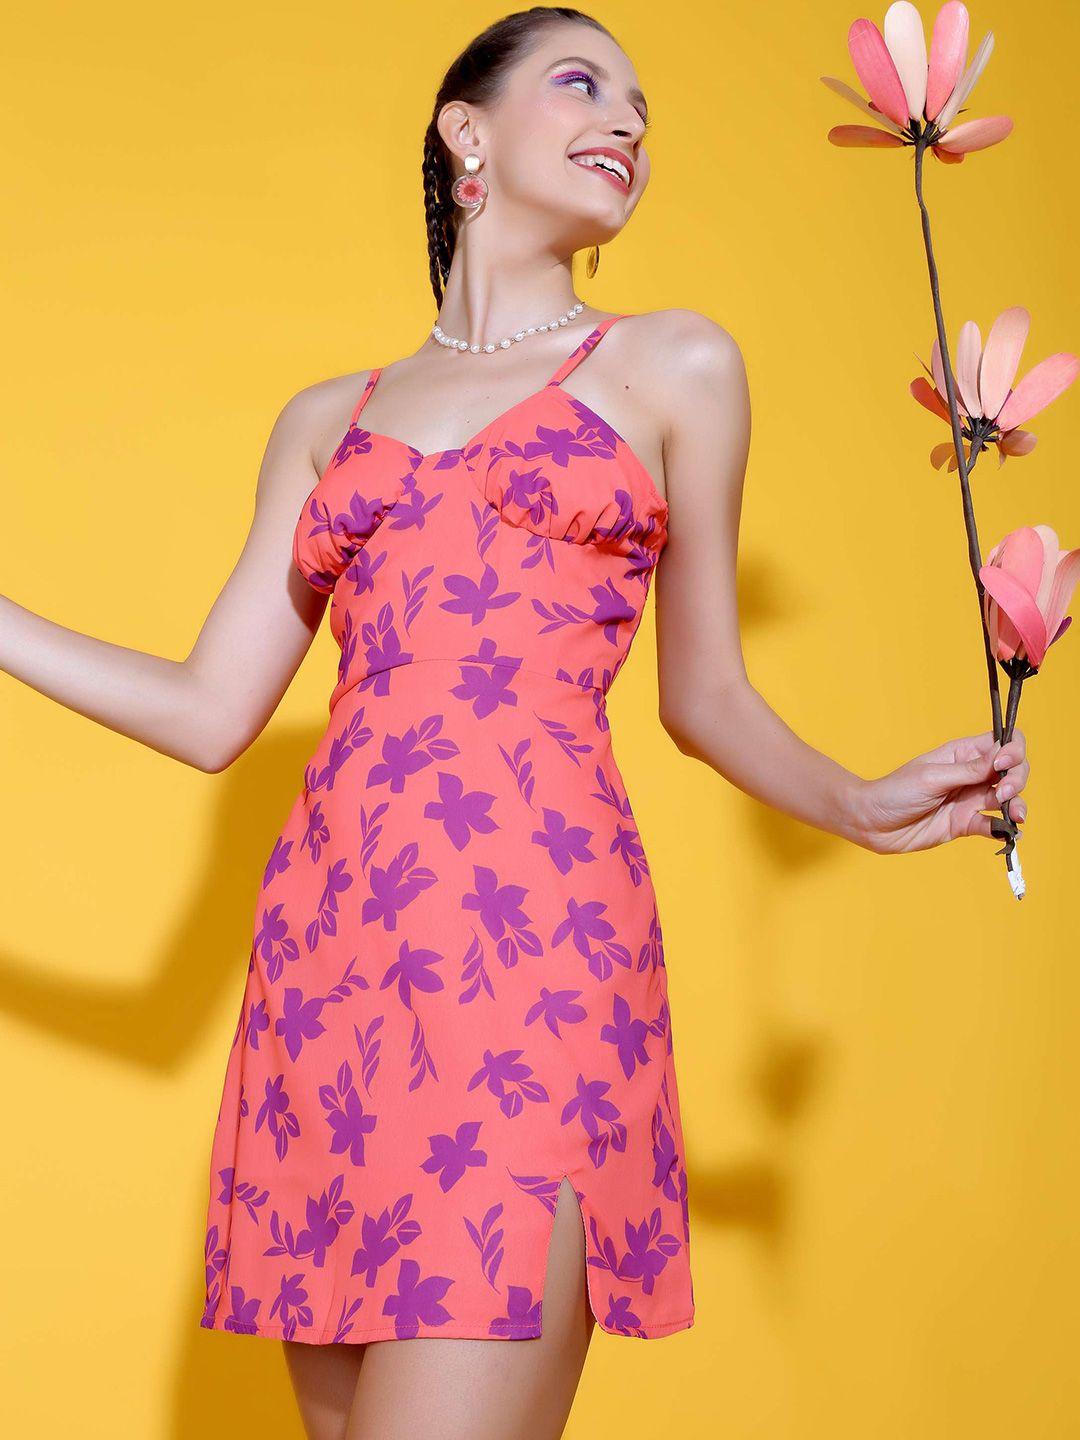 stylecast x hersheinbox coral floral printed georgette a-line dress